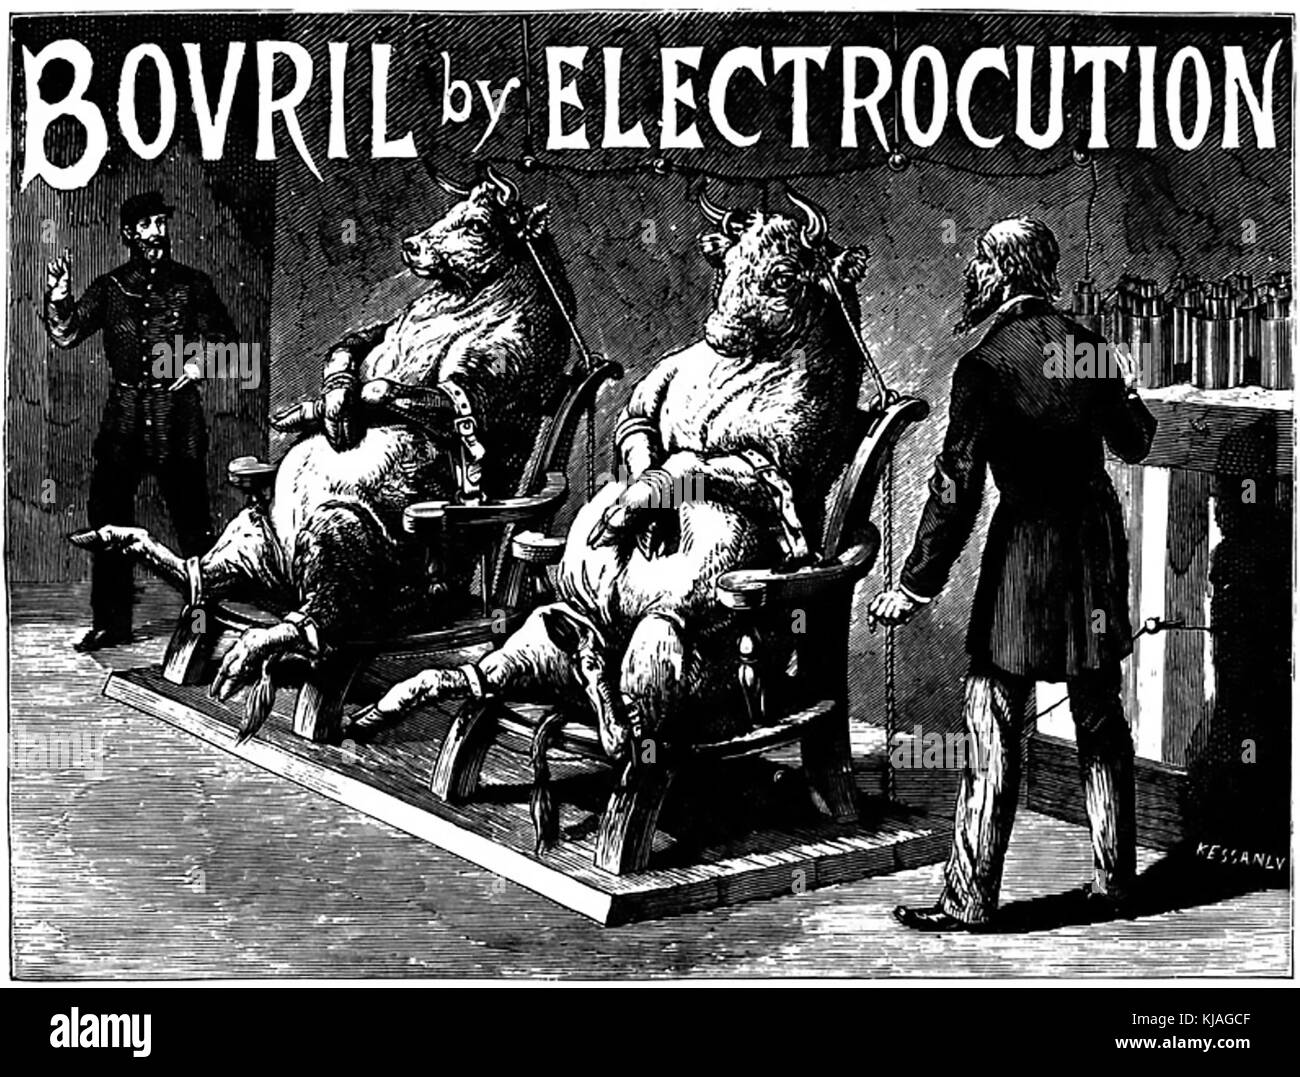 BOVRIL BY ELECTROCUTION advert about 1890 Stock Photo